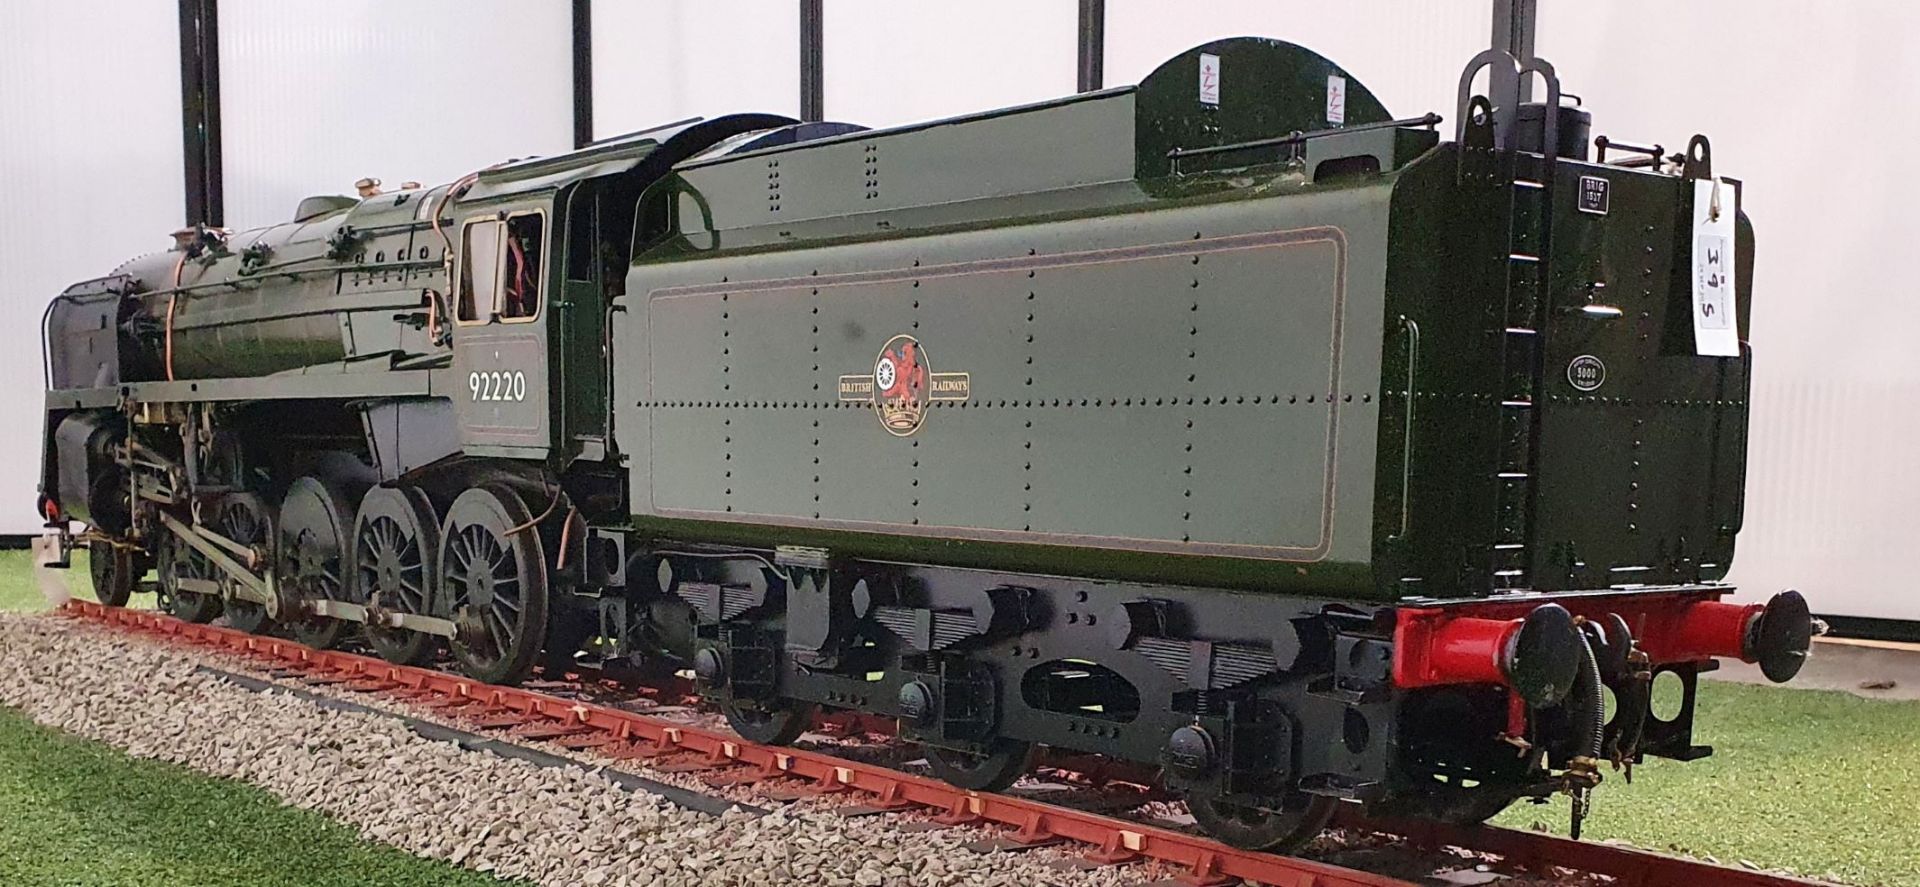 EVENING STAR (Steamed) - A Well Engineered 5 inch Gauge Model of the final Steam Locomotive to be - Image 8 of 10